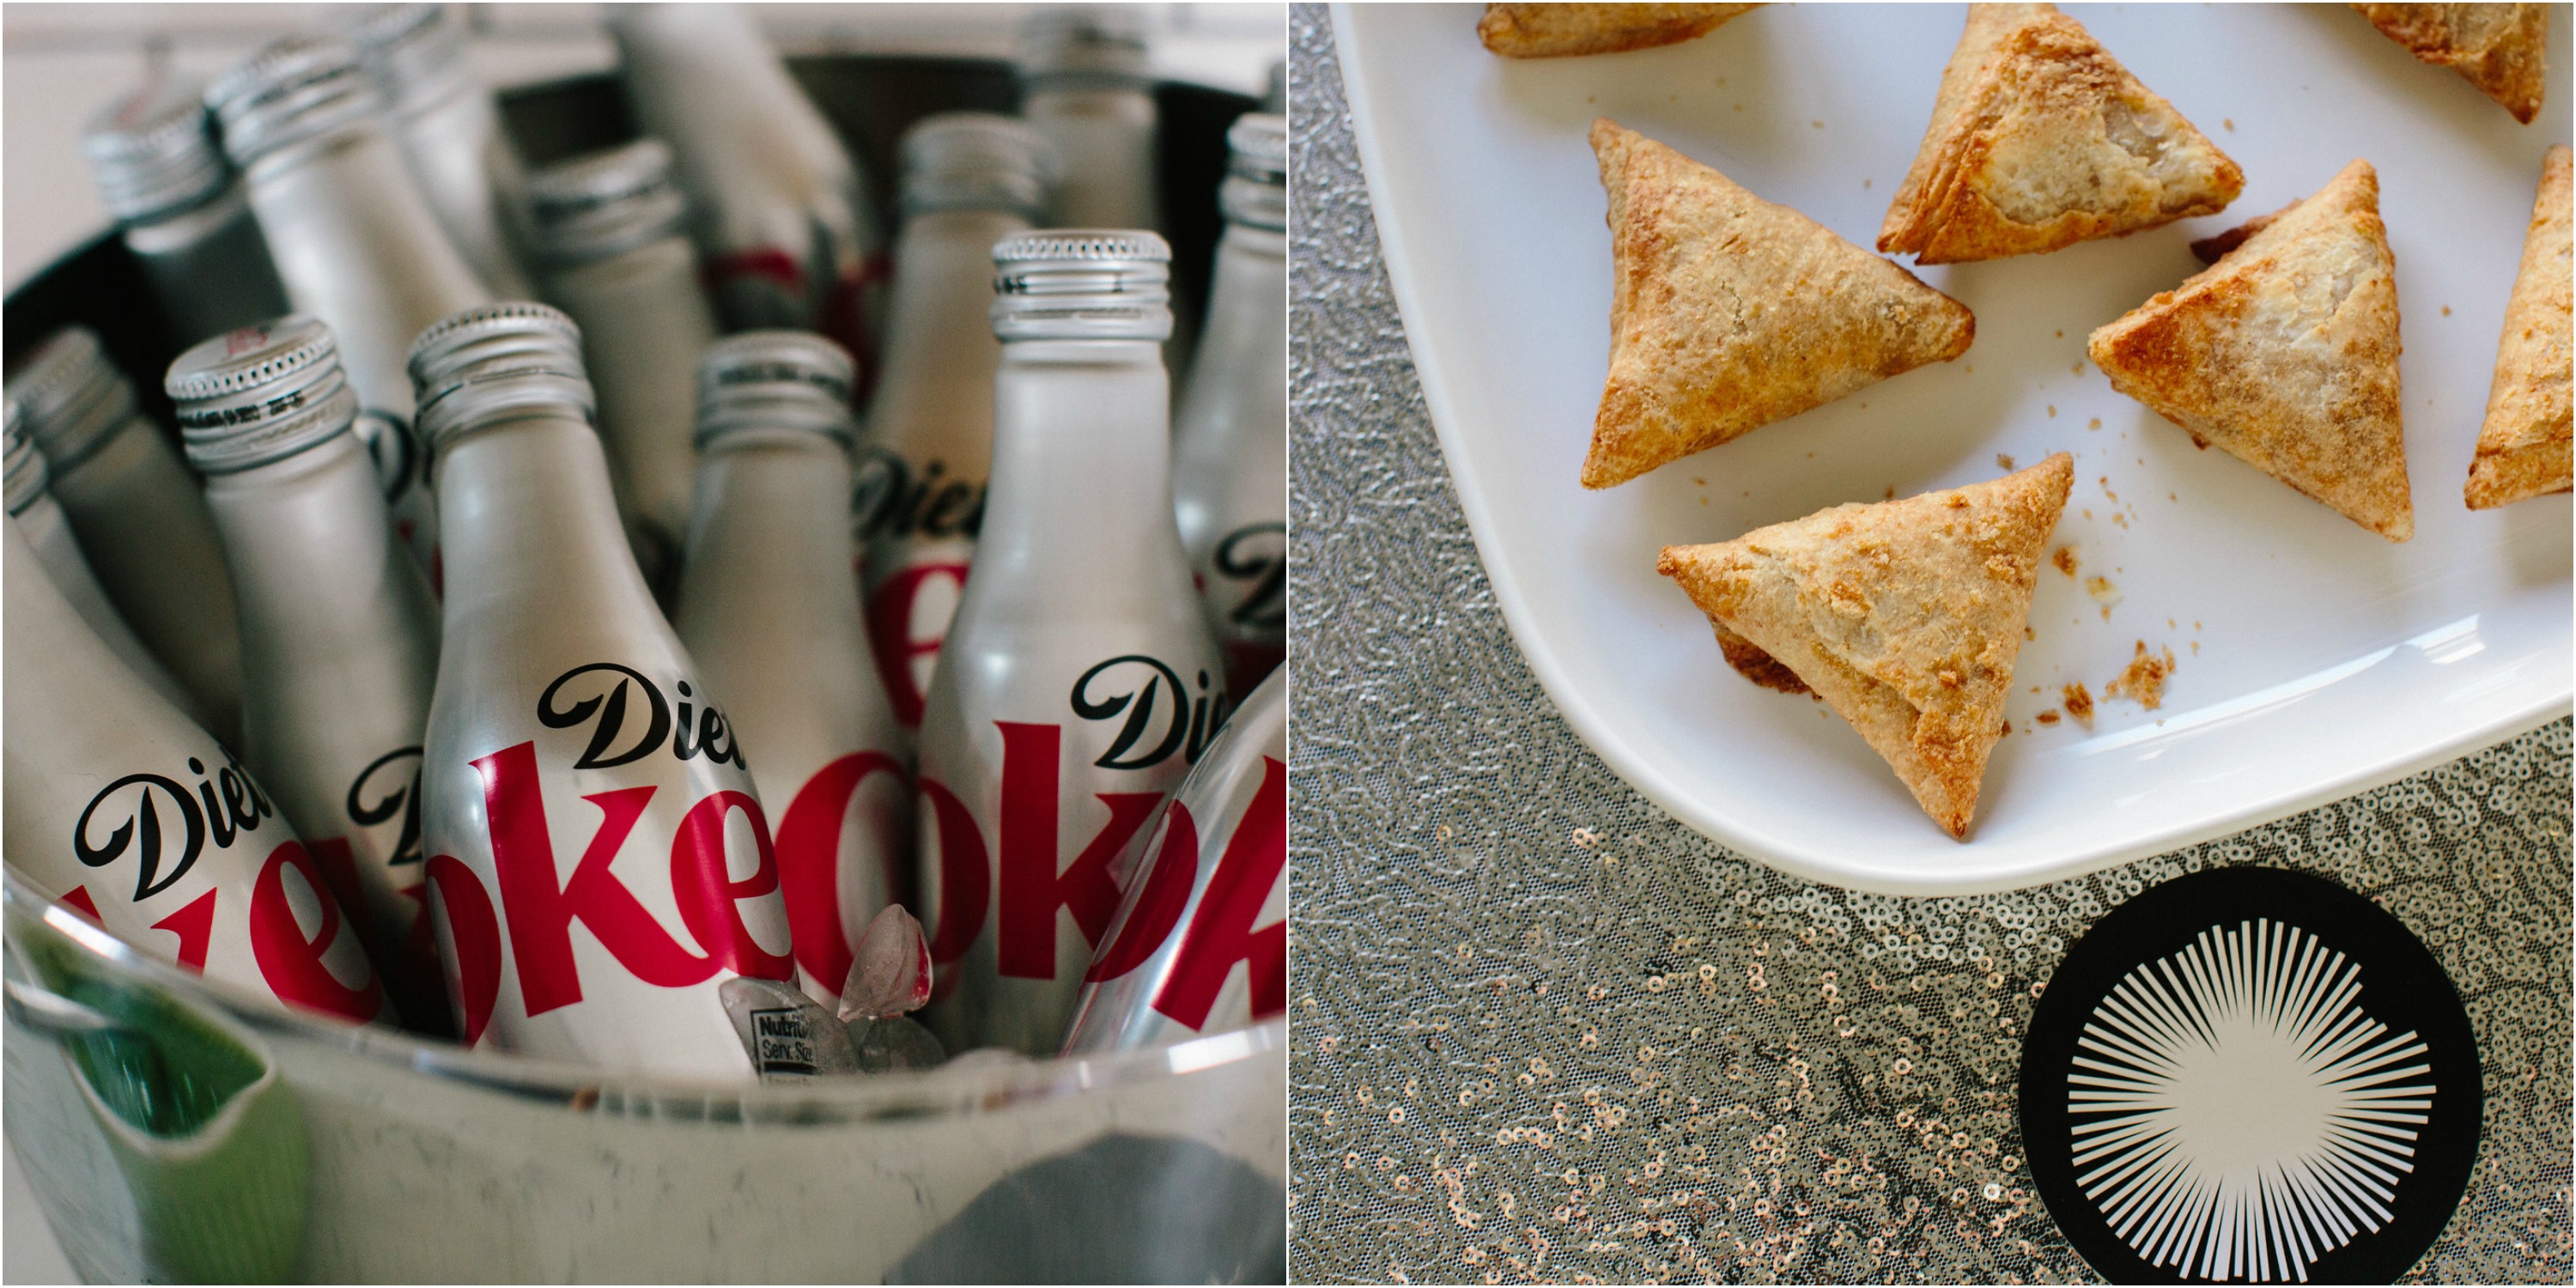 diet-coke-giveaway - Simple Holiday Entertaining by popular North Carolina blogger Coffee Beans and Bobby Pins